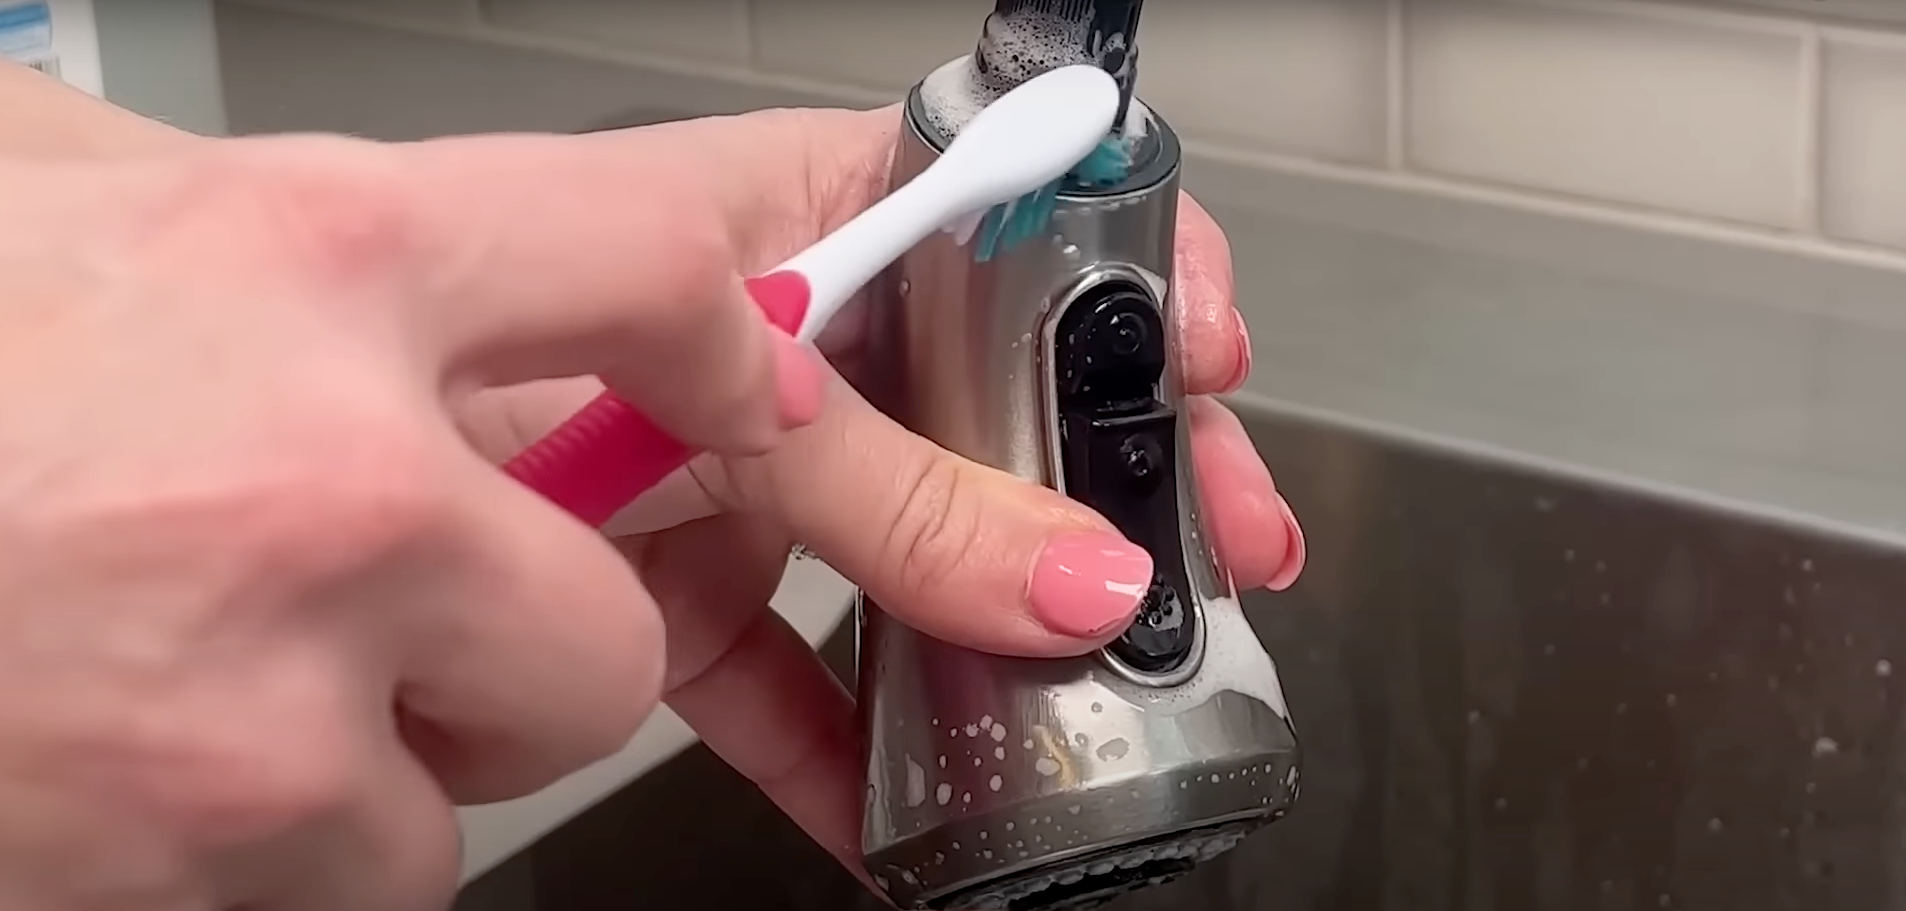 a person is cleaning an electric razor with a toothbrush .